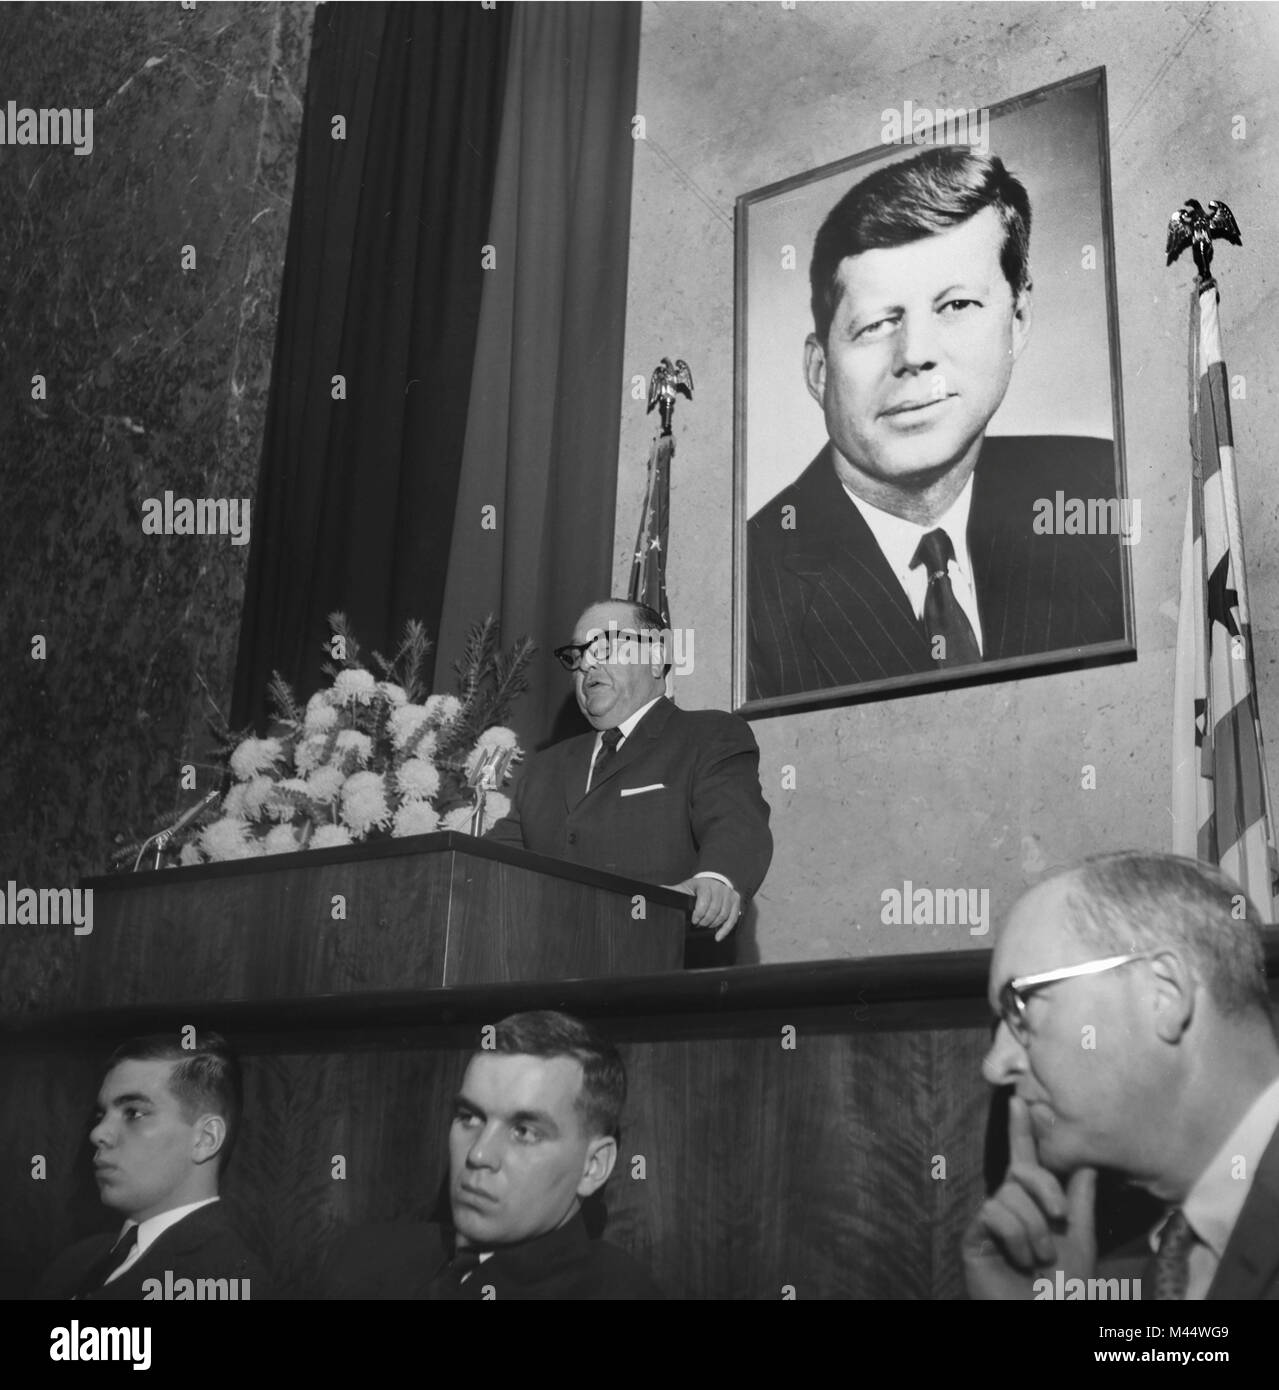 Chicago Mayor Richard J. Daley speaks at a memorial service for President Kennedy in Chicago in 1963.  Seated in front are Daly sons John,left, and future mayor, Richard M. Daley. Stock Photo